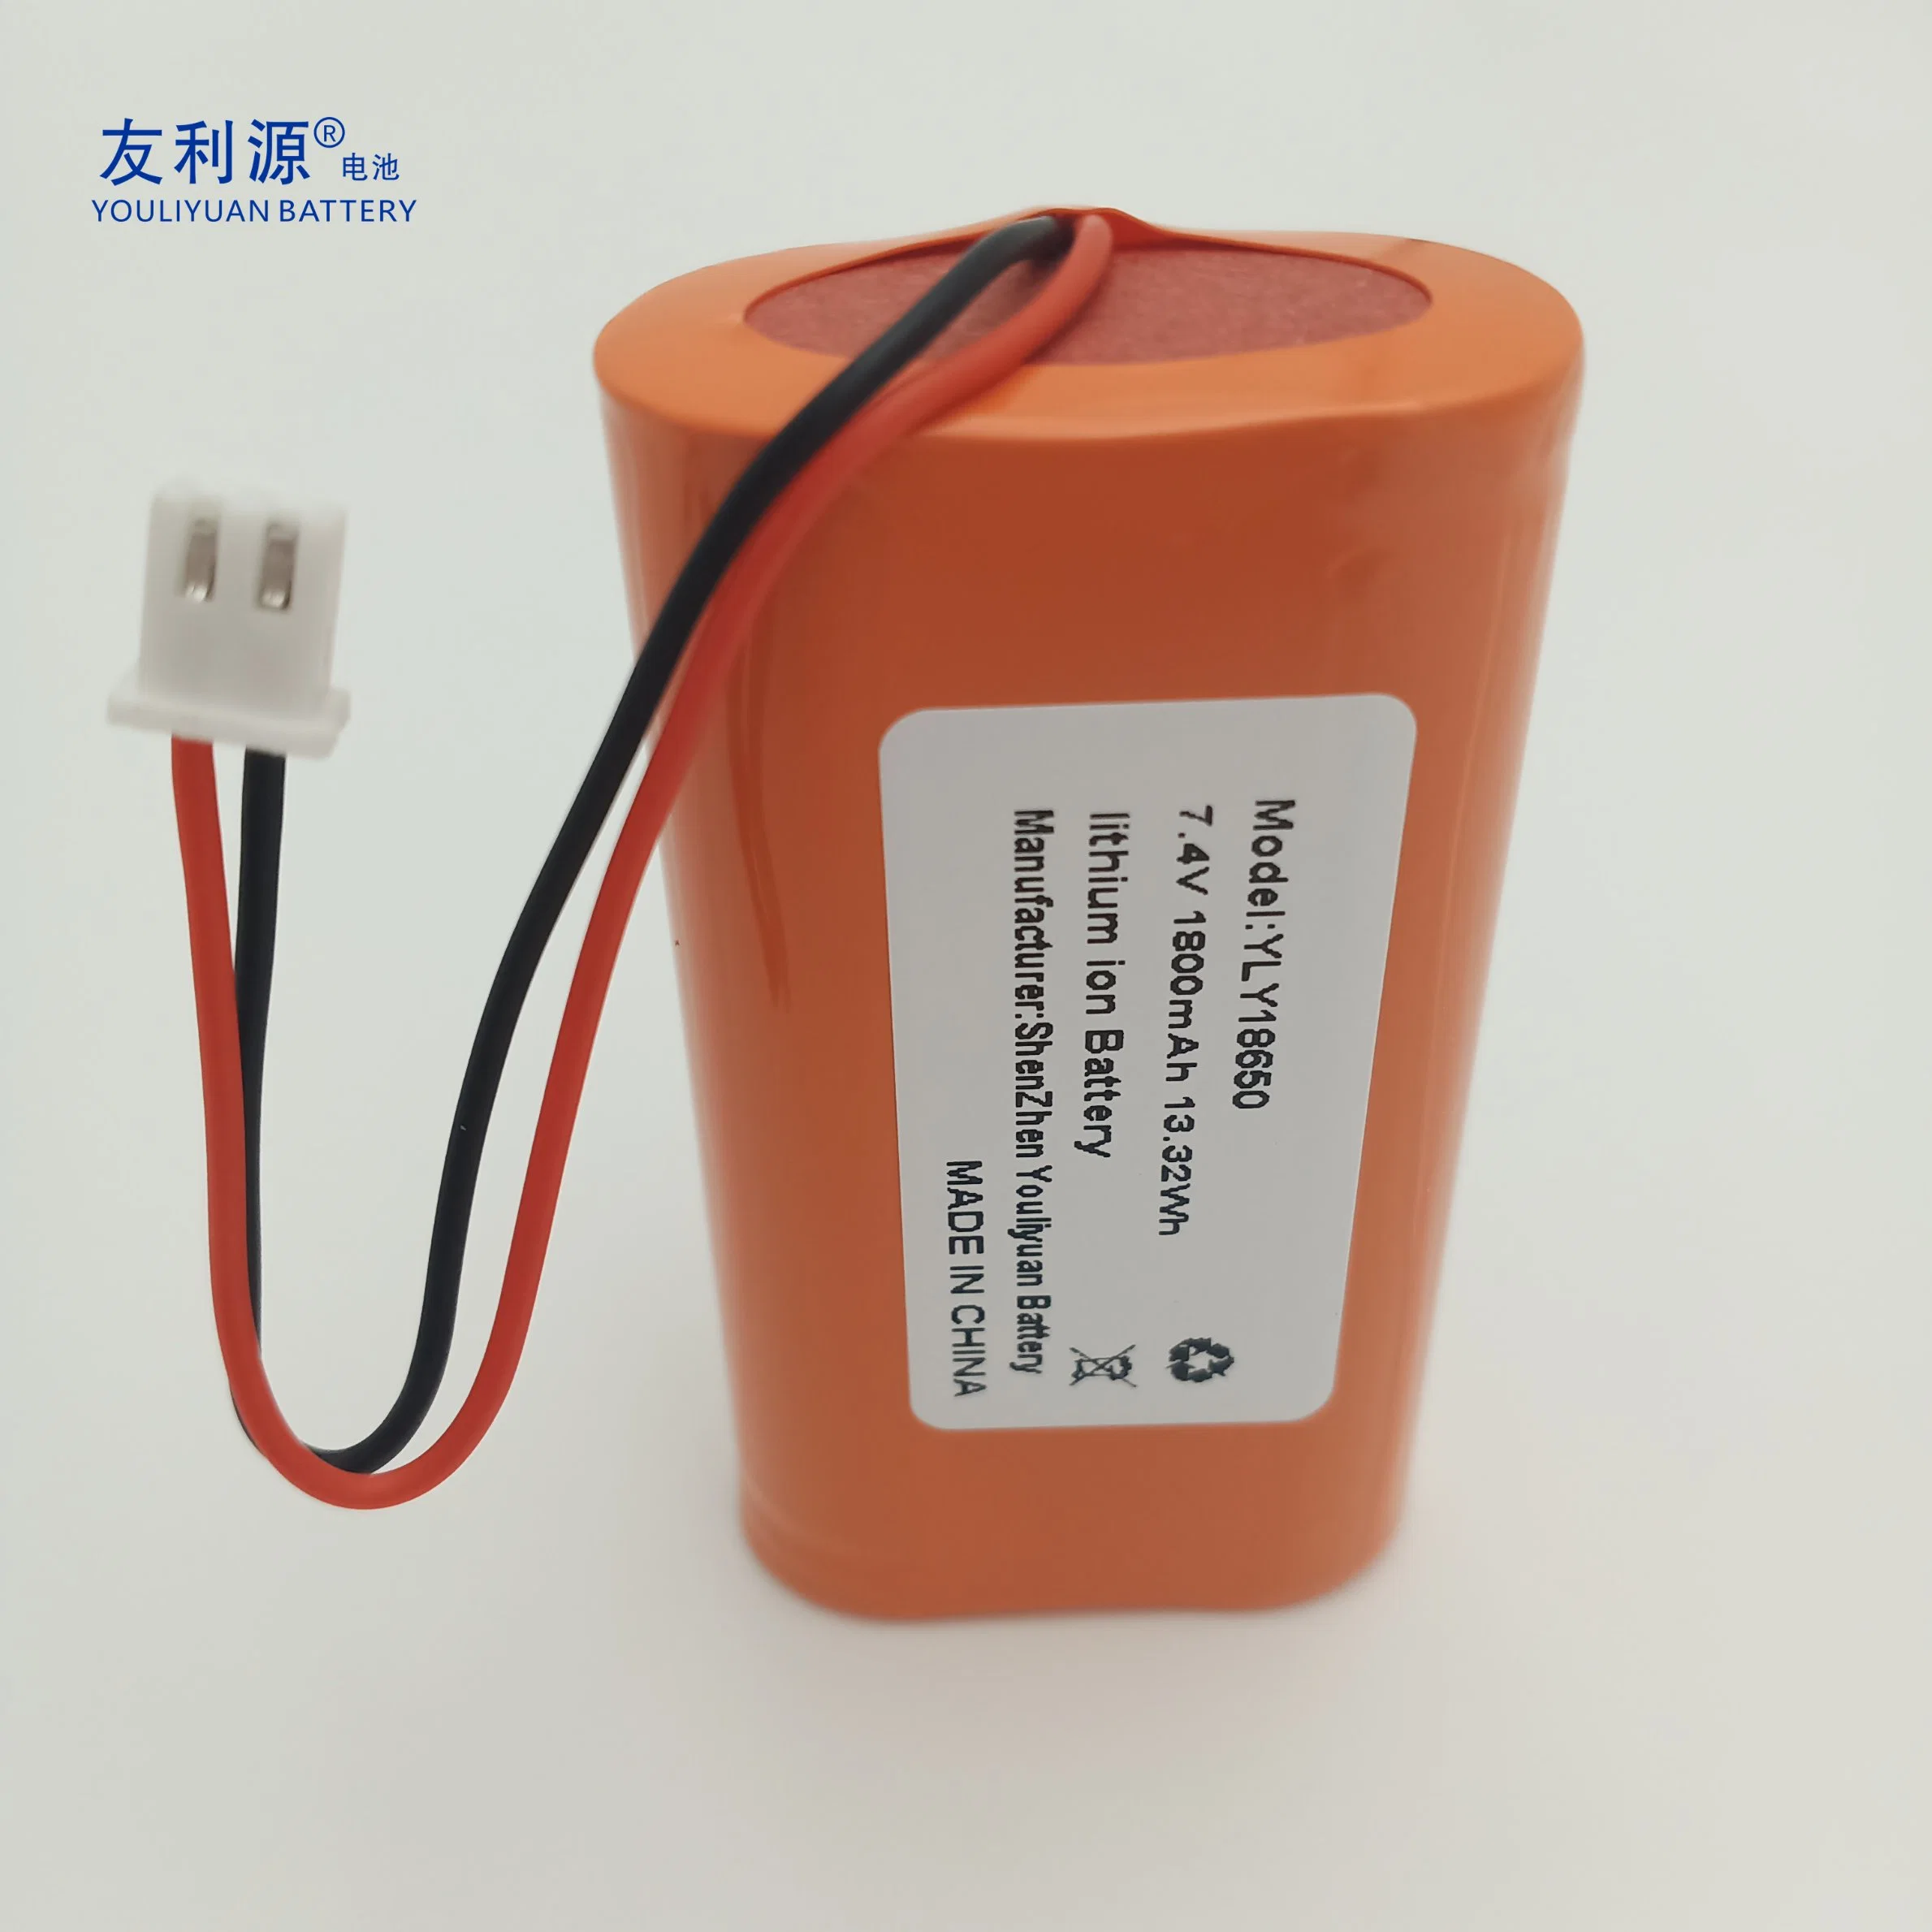 18650 Cell 2s1p 7.4V 1800mAh Rechargeable Lithium Battery for LED Light Head Lamp Walkie-Talkie